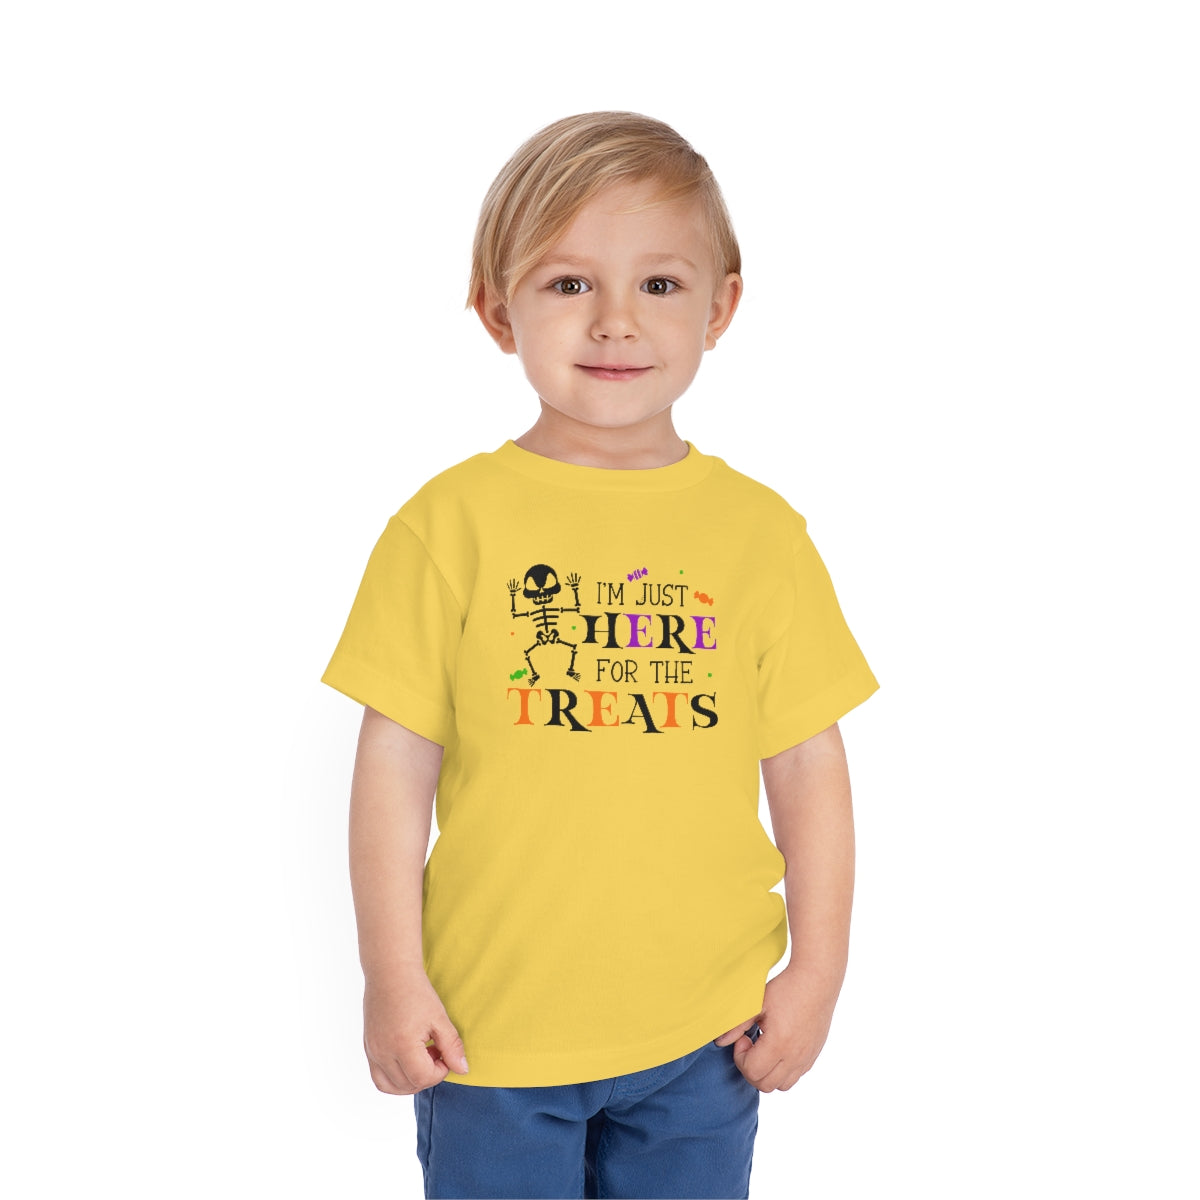 Here for the Treats Toddler Tee